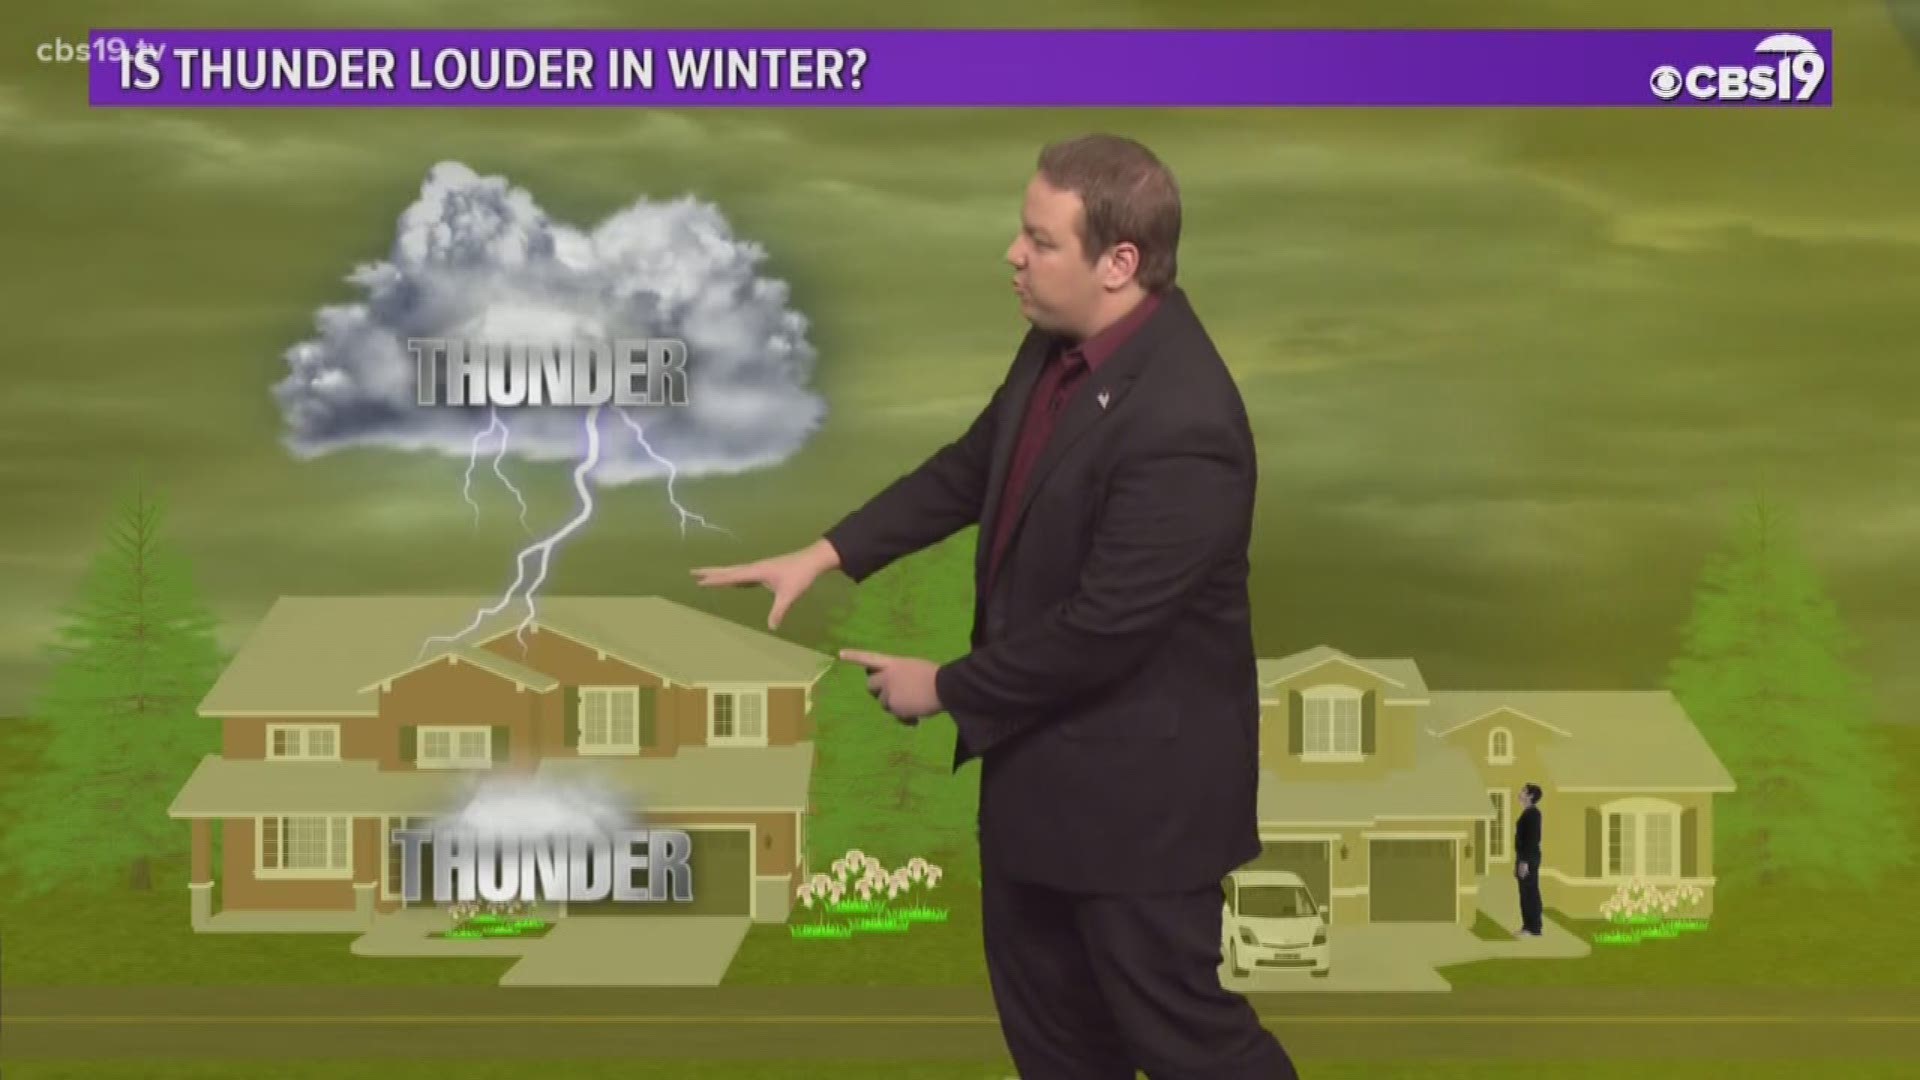 There's a claim going around that thunder is actually louder during the winter when it is cold outside. Is this true? CBS 19 Meteorologist Michael Behrens explains the science!